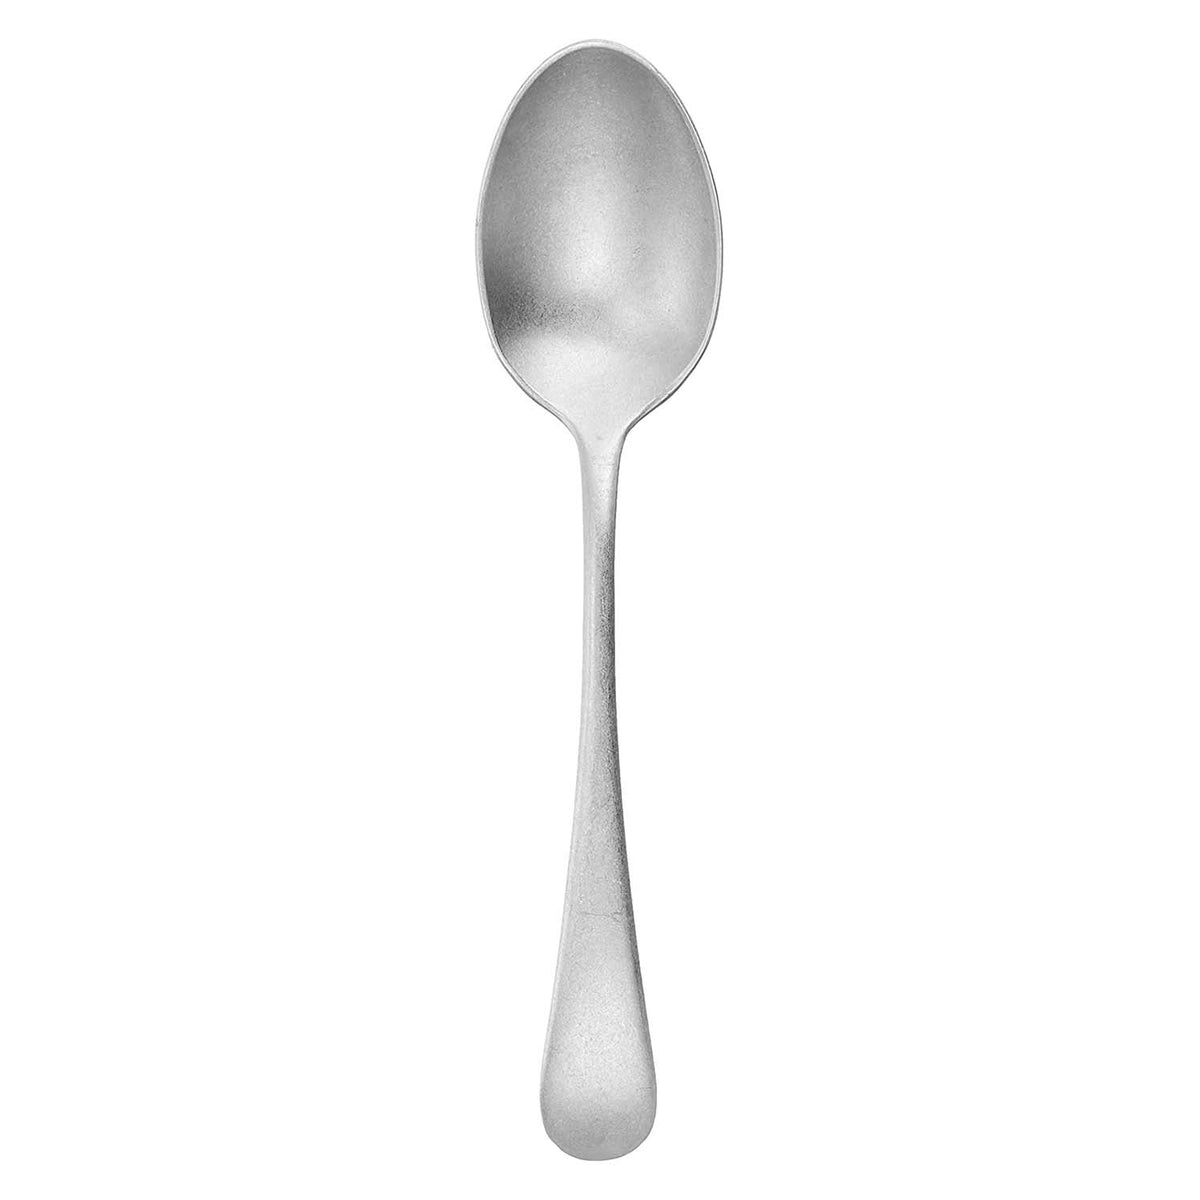 AOYOSHI VINTAGE Old English Stainless Steel Dinner Spoon